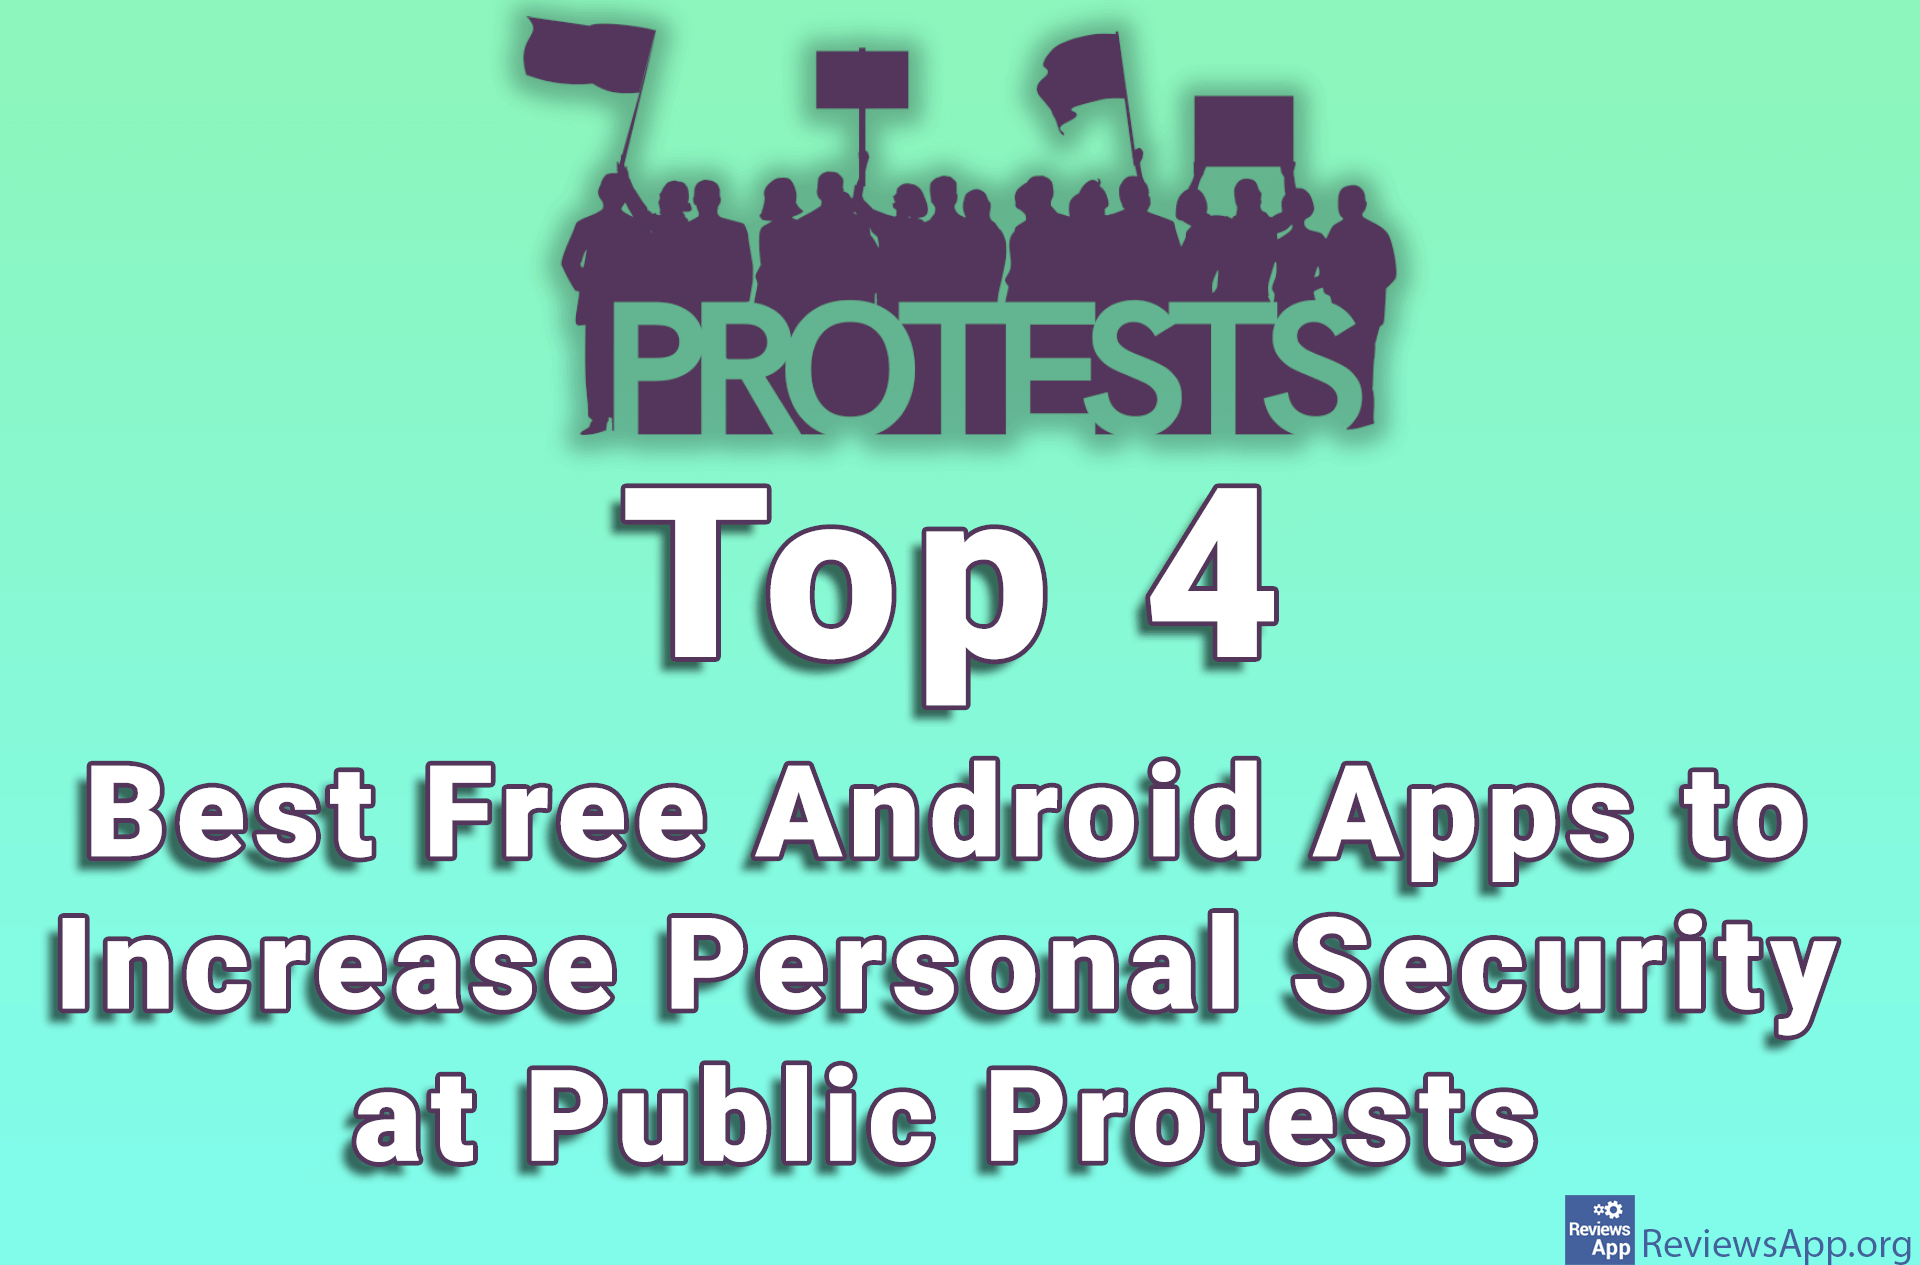 Top 4 Best Free Android Apps to Increase Personal Security at Public Protests